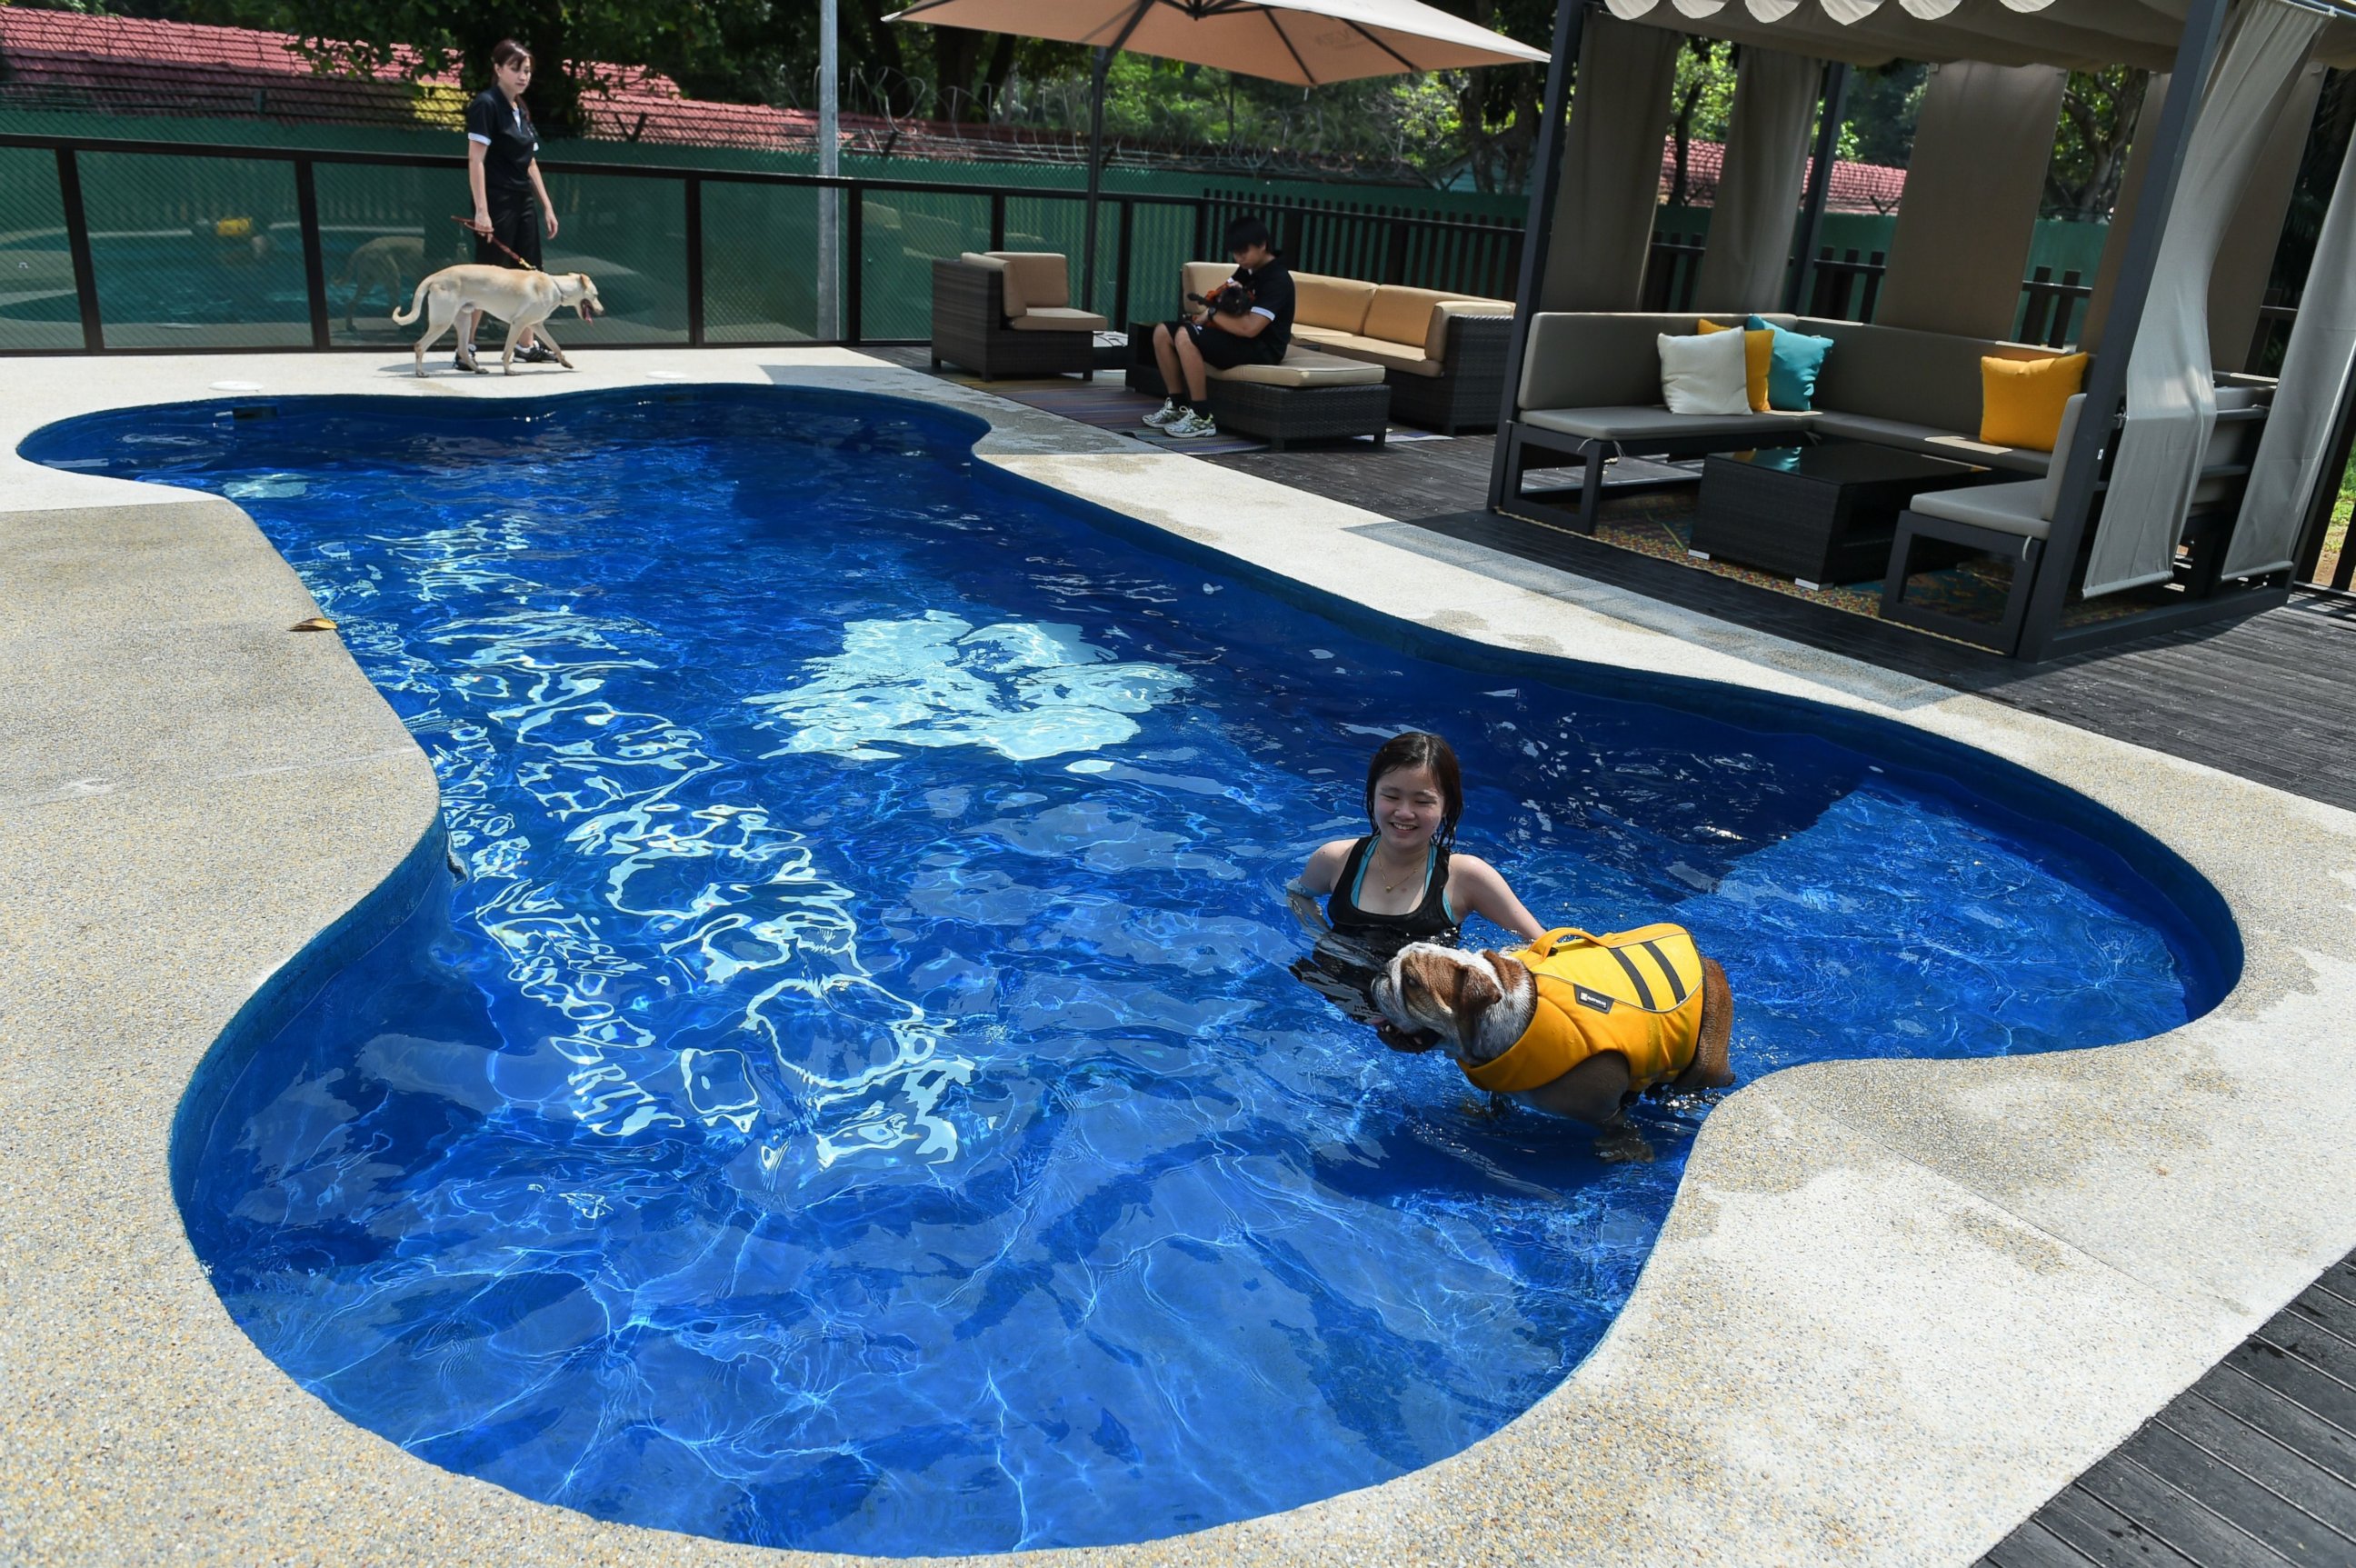 PHOTO: A staff member takes a dog for a swim in a bone-shaped pool at the Wagington luxury pet hotel in Singapore on Nov. 4, 2014.